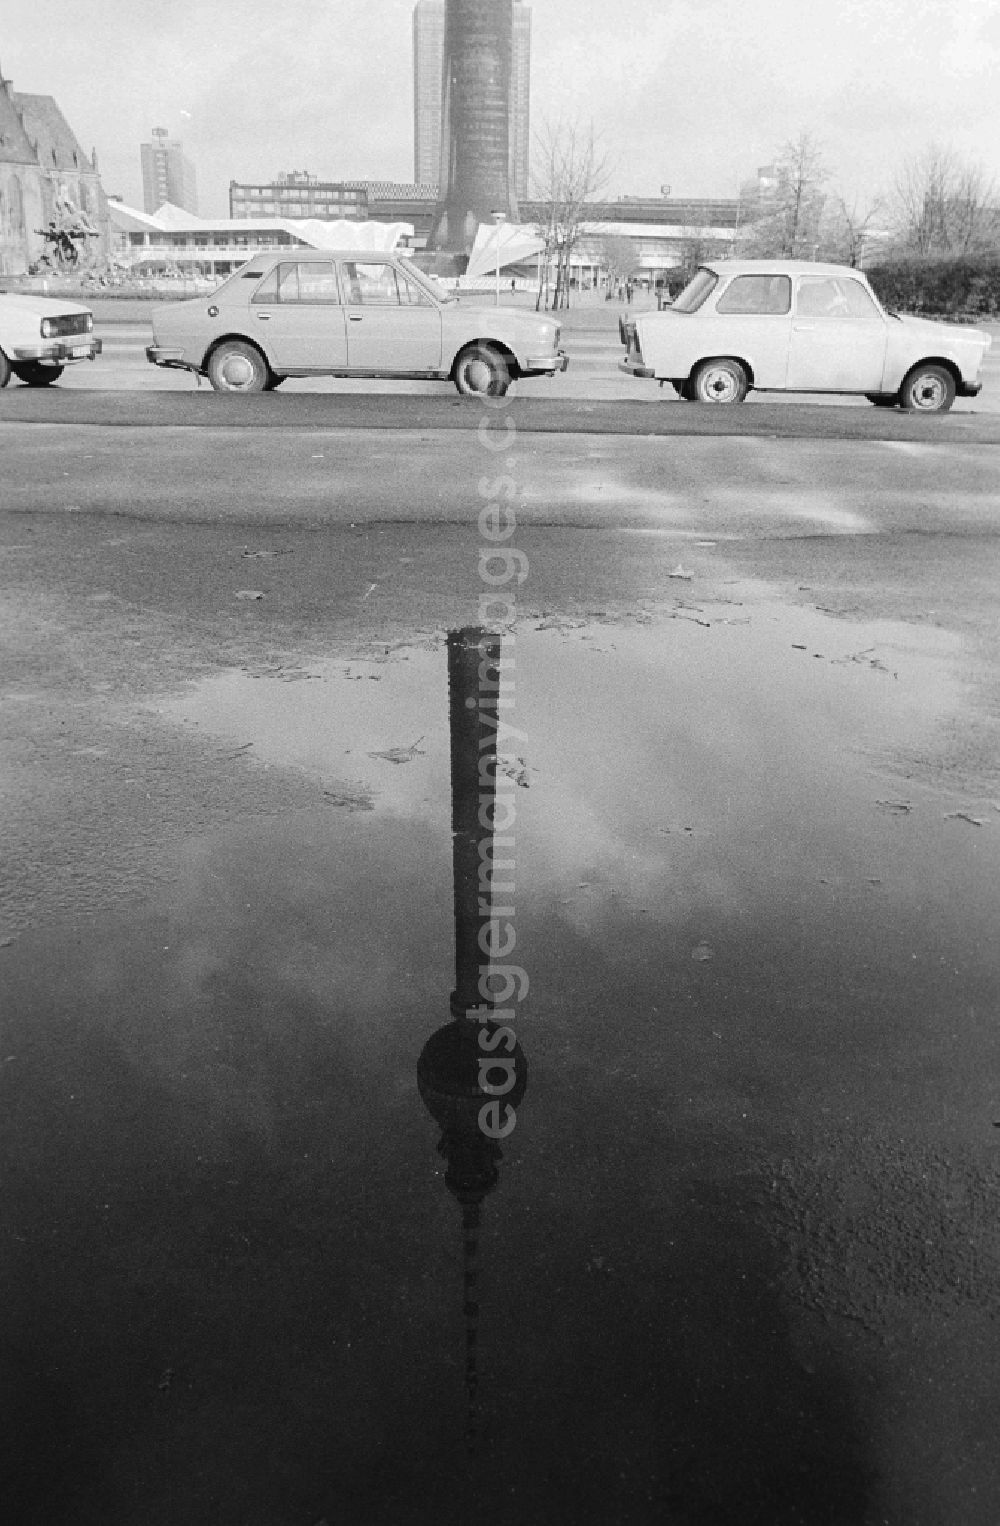 GDR picture archive: Berlin - Reflexion of the Berlin television tower in a puddle in Berlin, the former capital of the GDR, German democratic republic